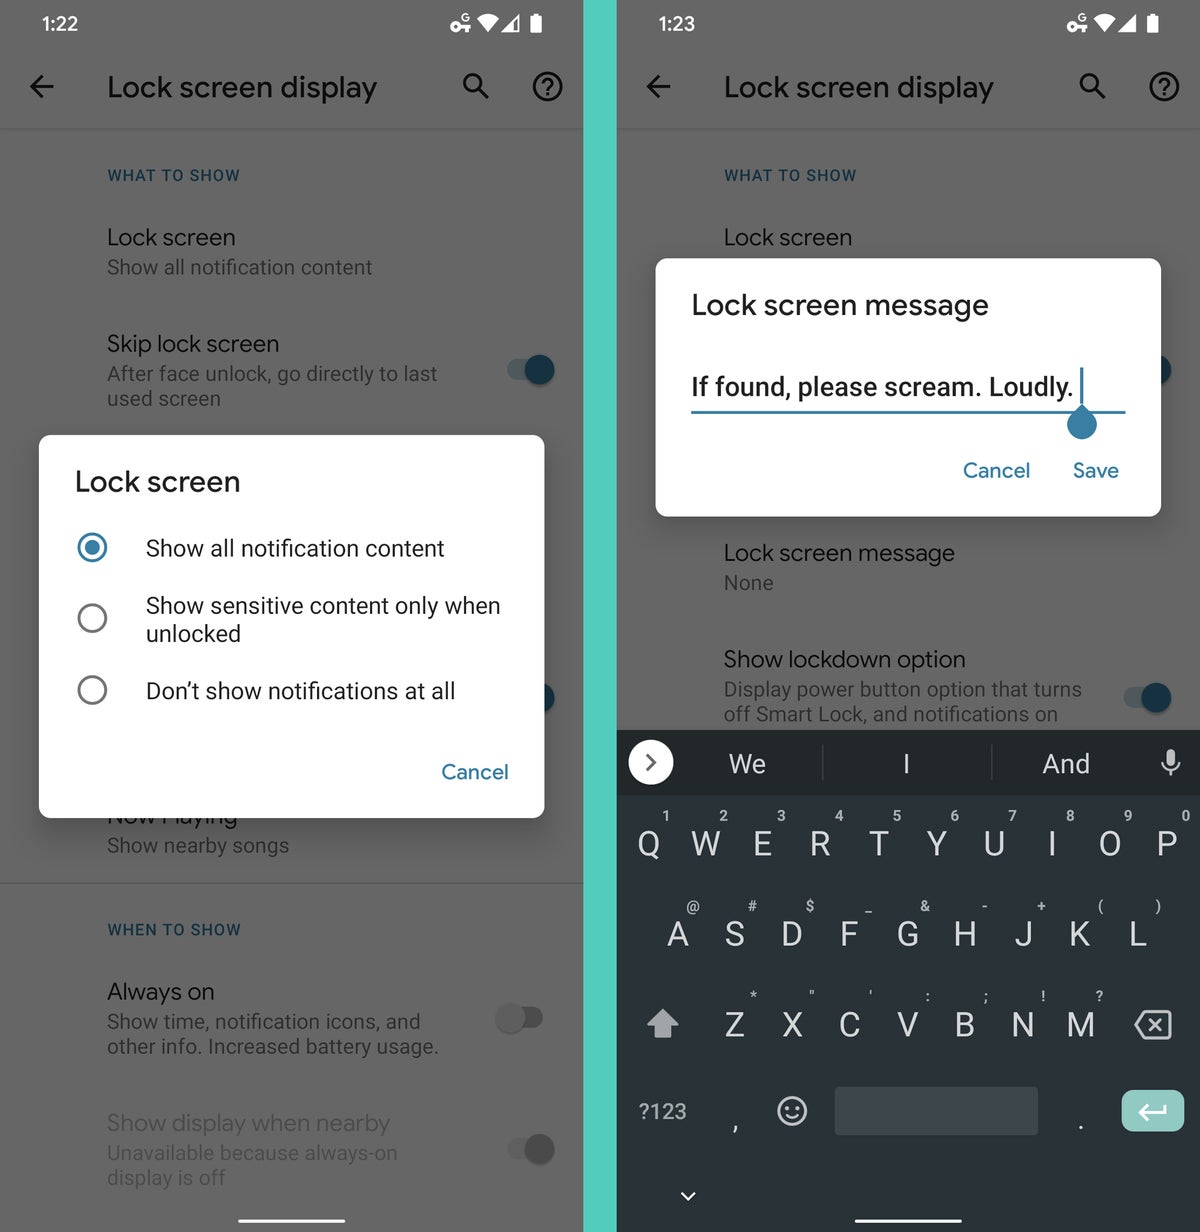 Android Security Audit: Lock Screen